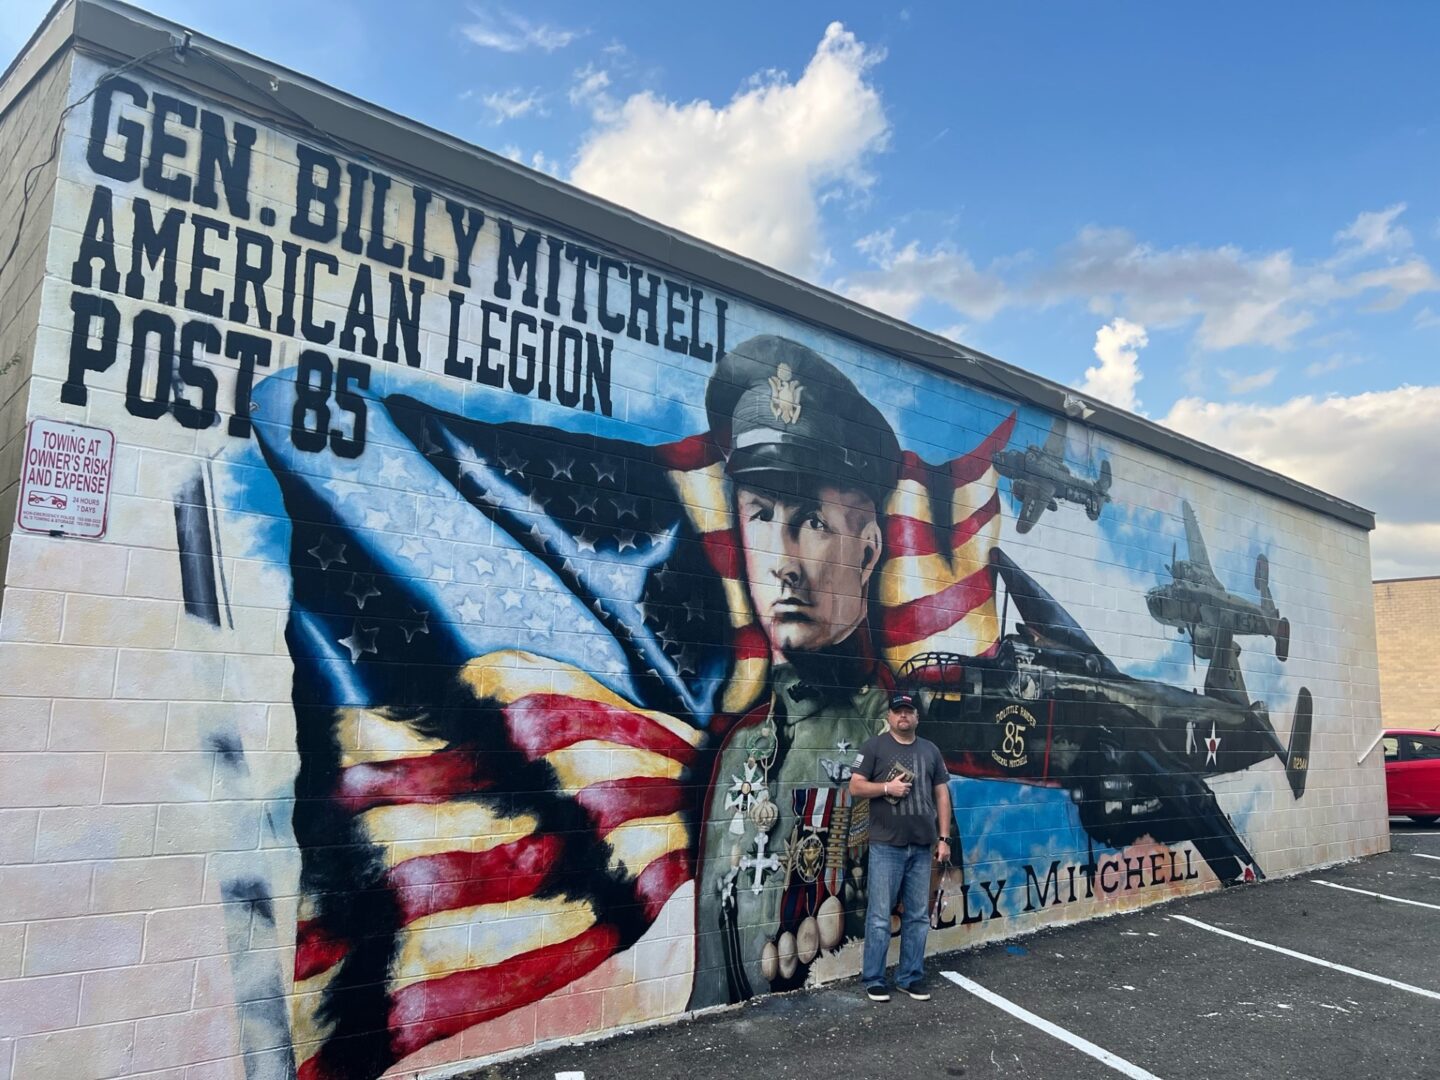 A man standing in front of a mural that says gen billy kitchener american legion post 86.